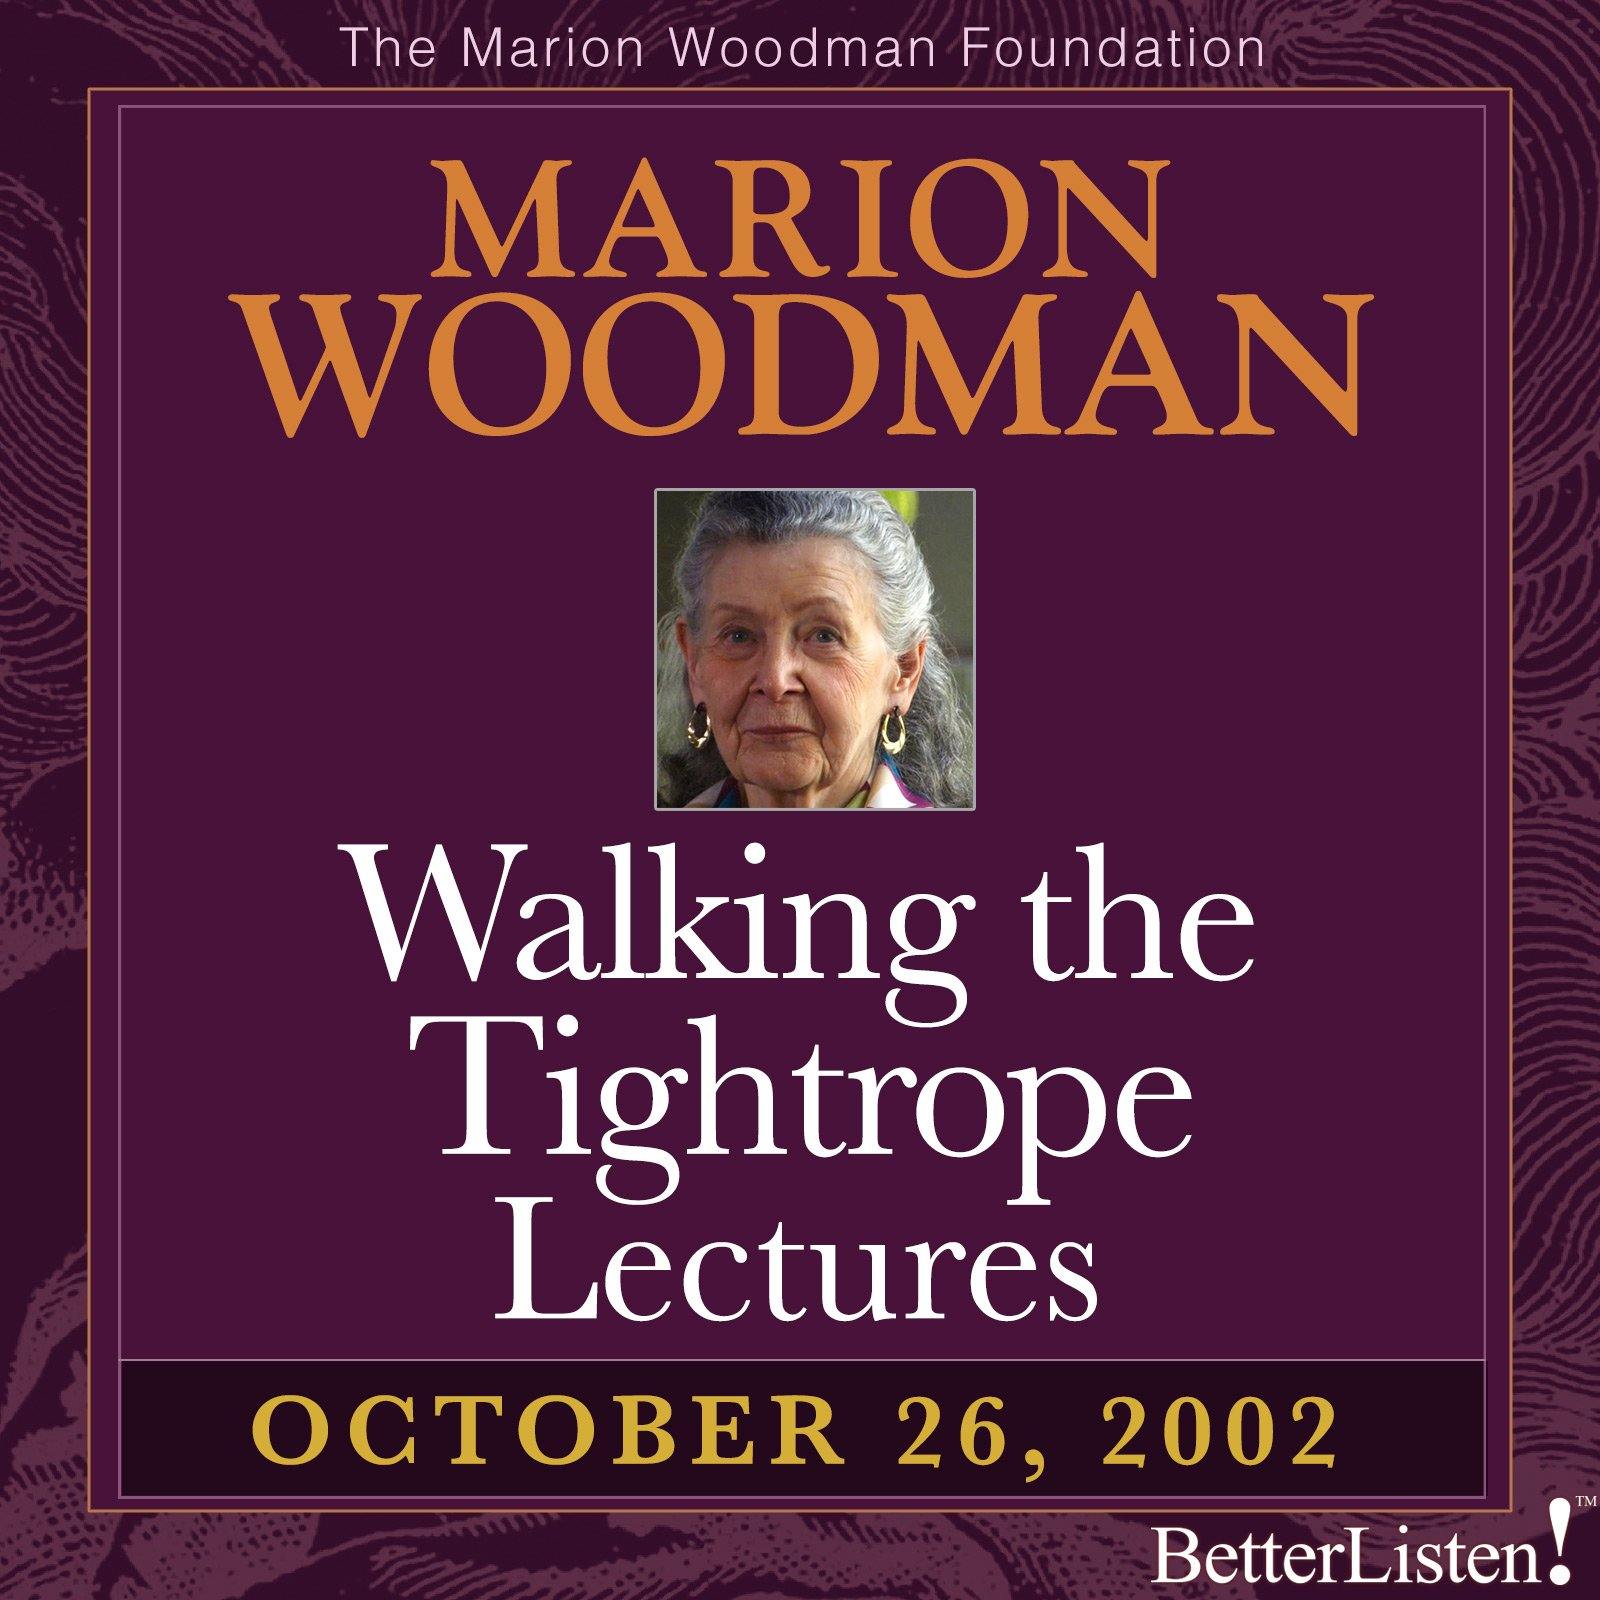 Walking the Tightrope Lectures Marion Woodman #2 - 10-26-02 - BetterListen!